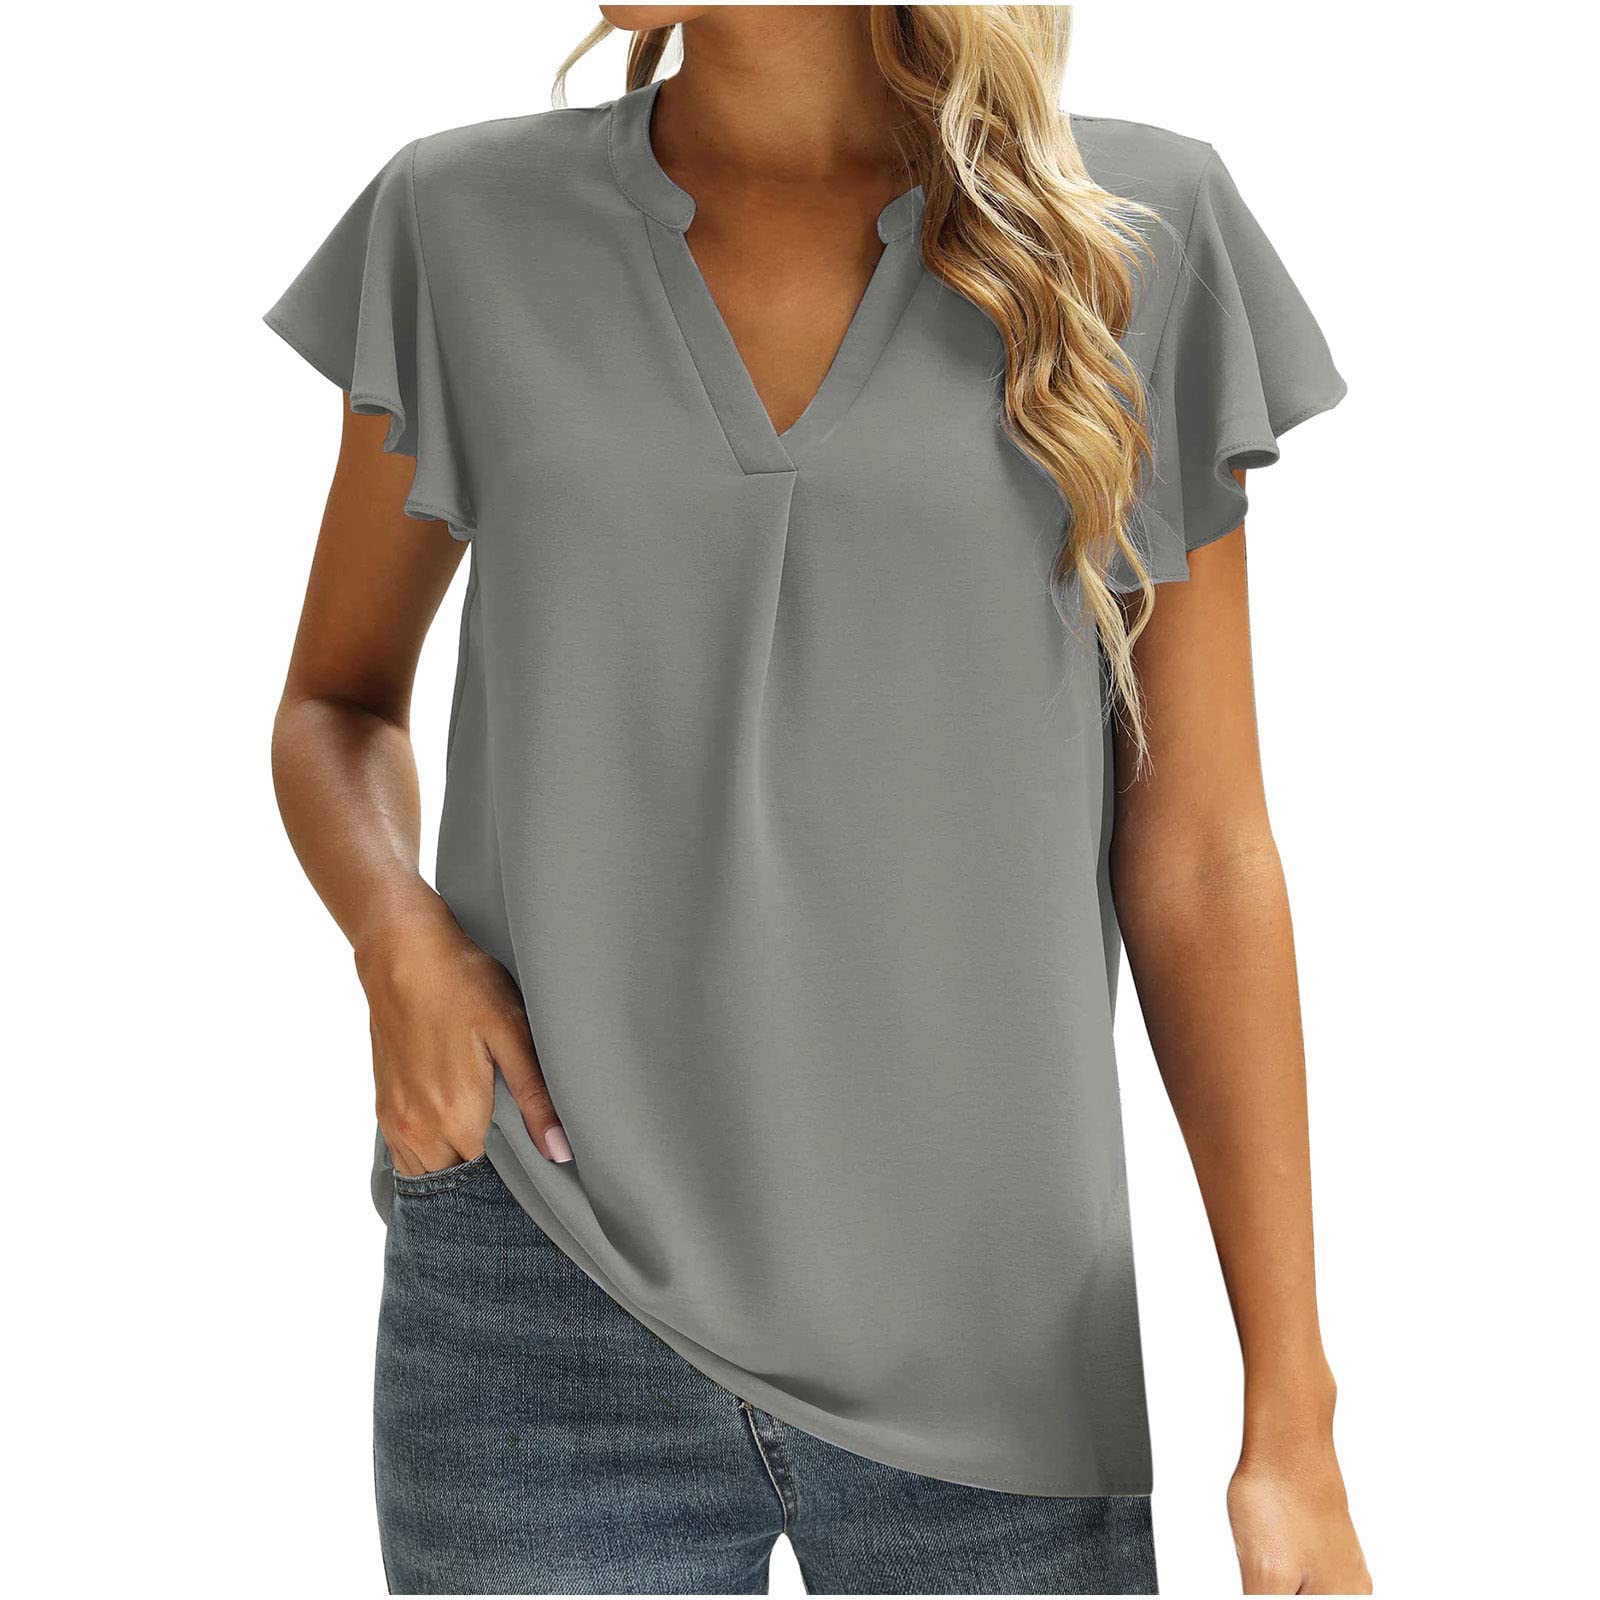 Women's Solid Color Tunic Top